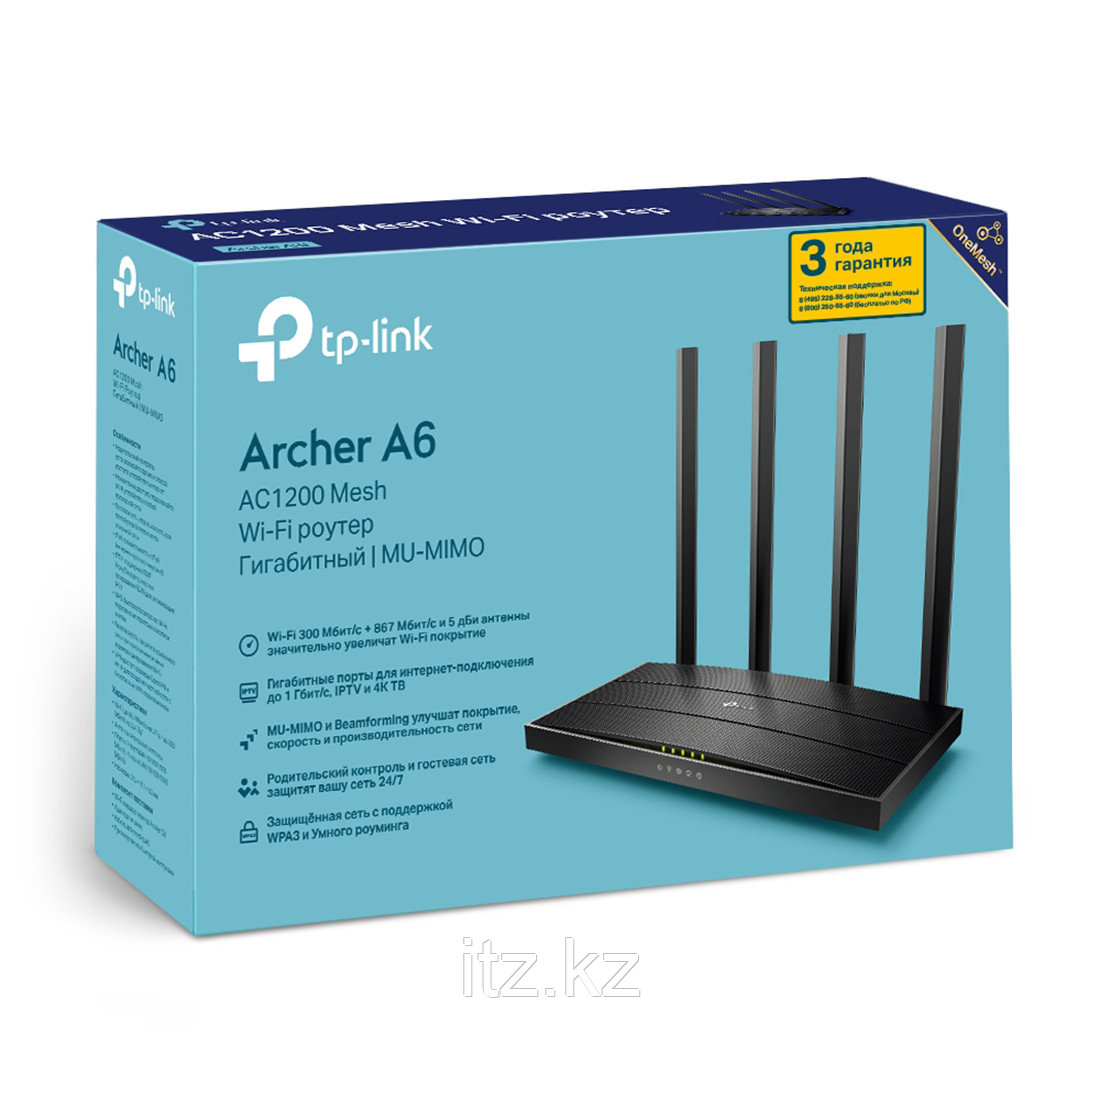 Маршрутизатор TP-Link Archer A6 - фото 3 - id-p103764707